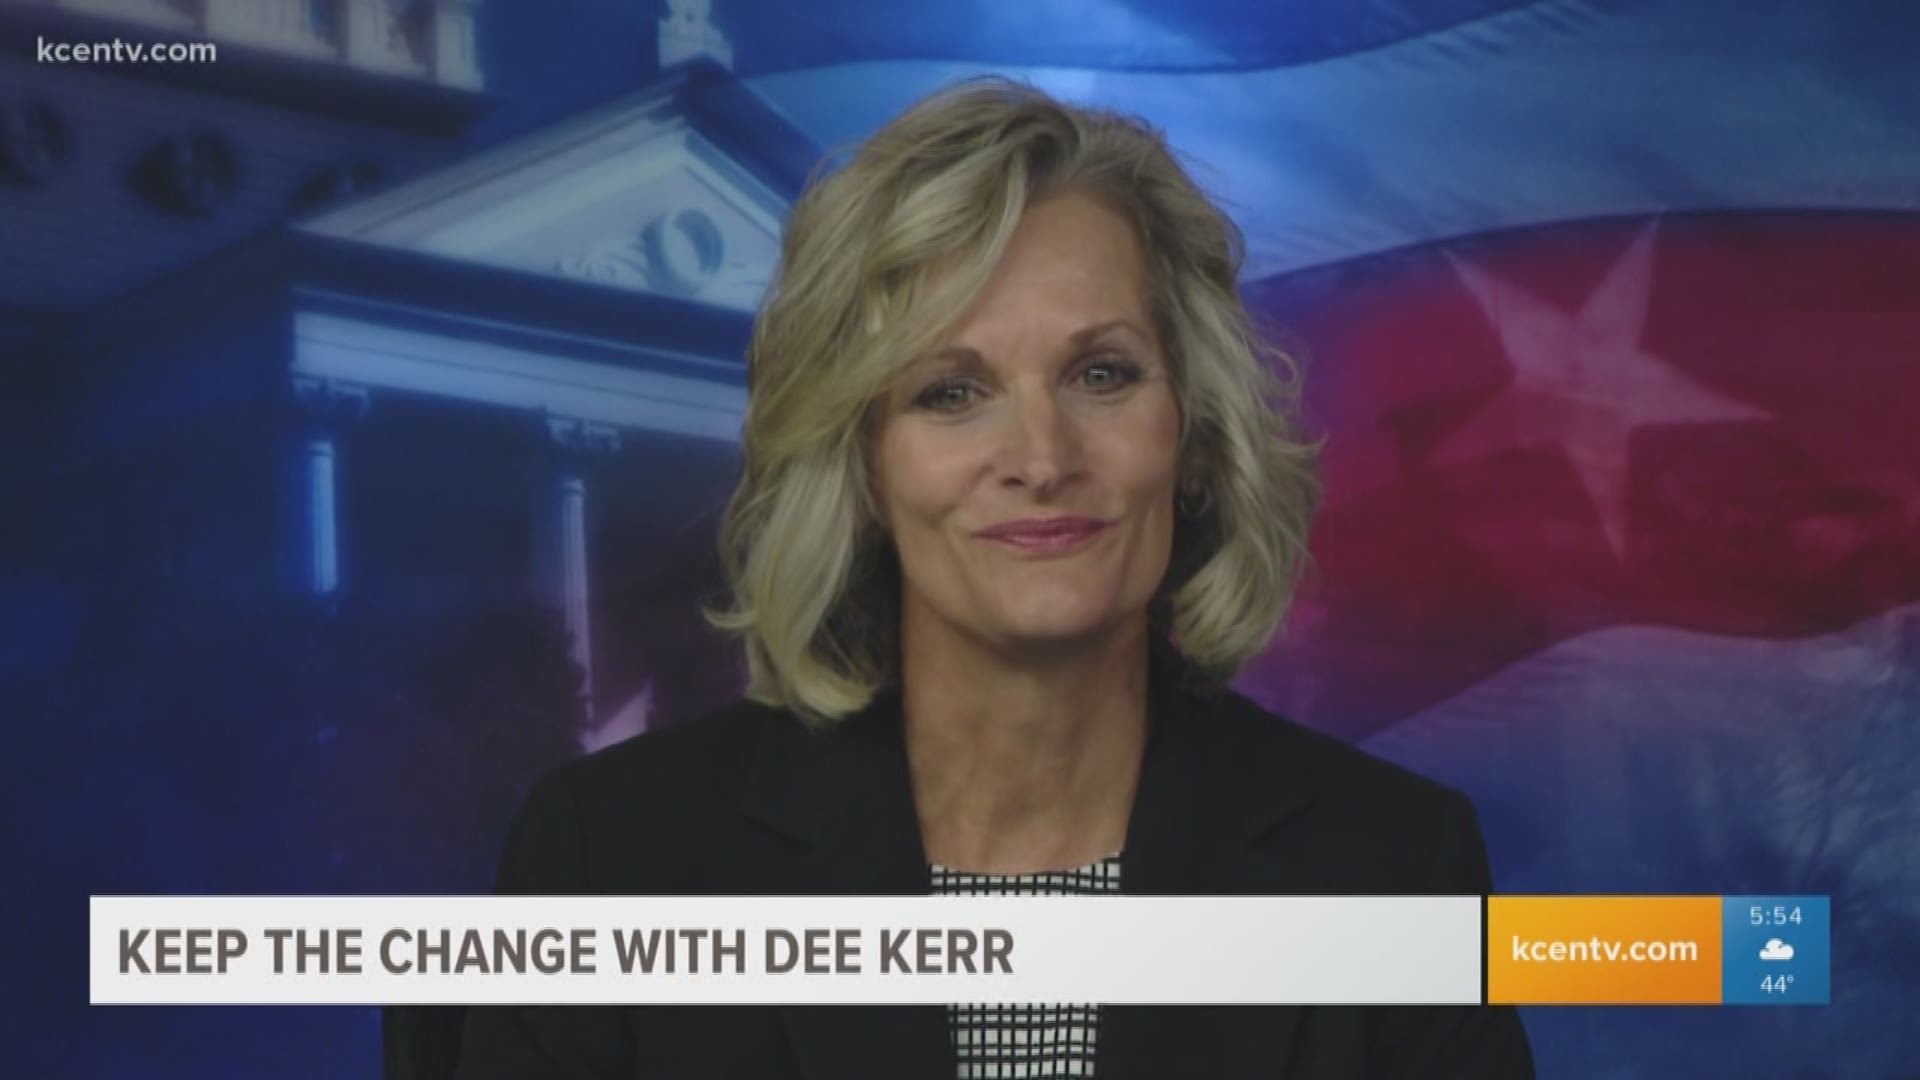 Dee Kerr has suggestions on how to save and invest your money.